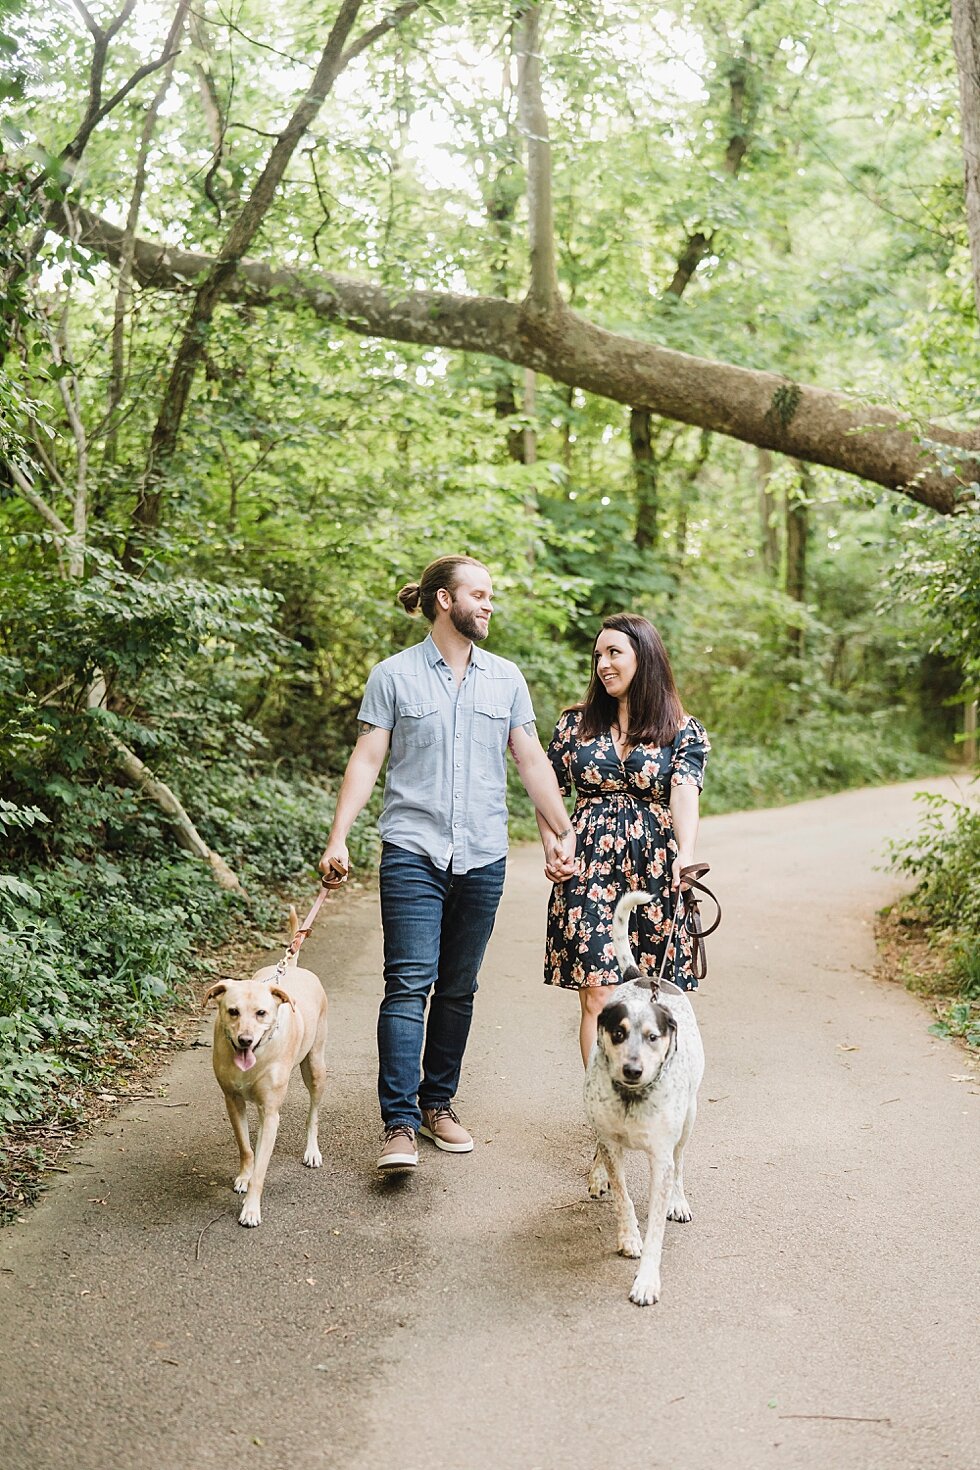  Walking the dogs during their engagement session was the perfect lifestyle tie for this couple. #engagementgoals #engagementphotographer #engaged #outdoorengagement #kentuckyphotographer #indianaphotographer #louisvillephotographer #engagementphotos